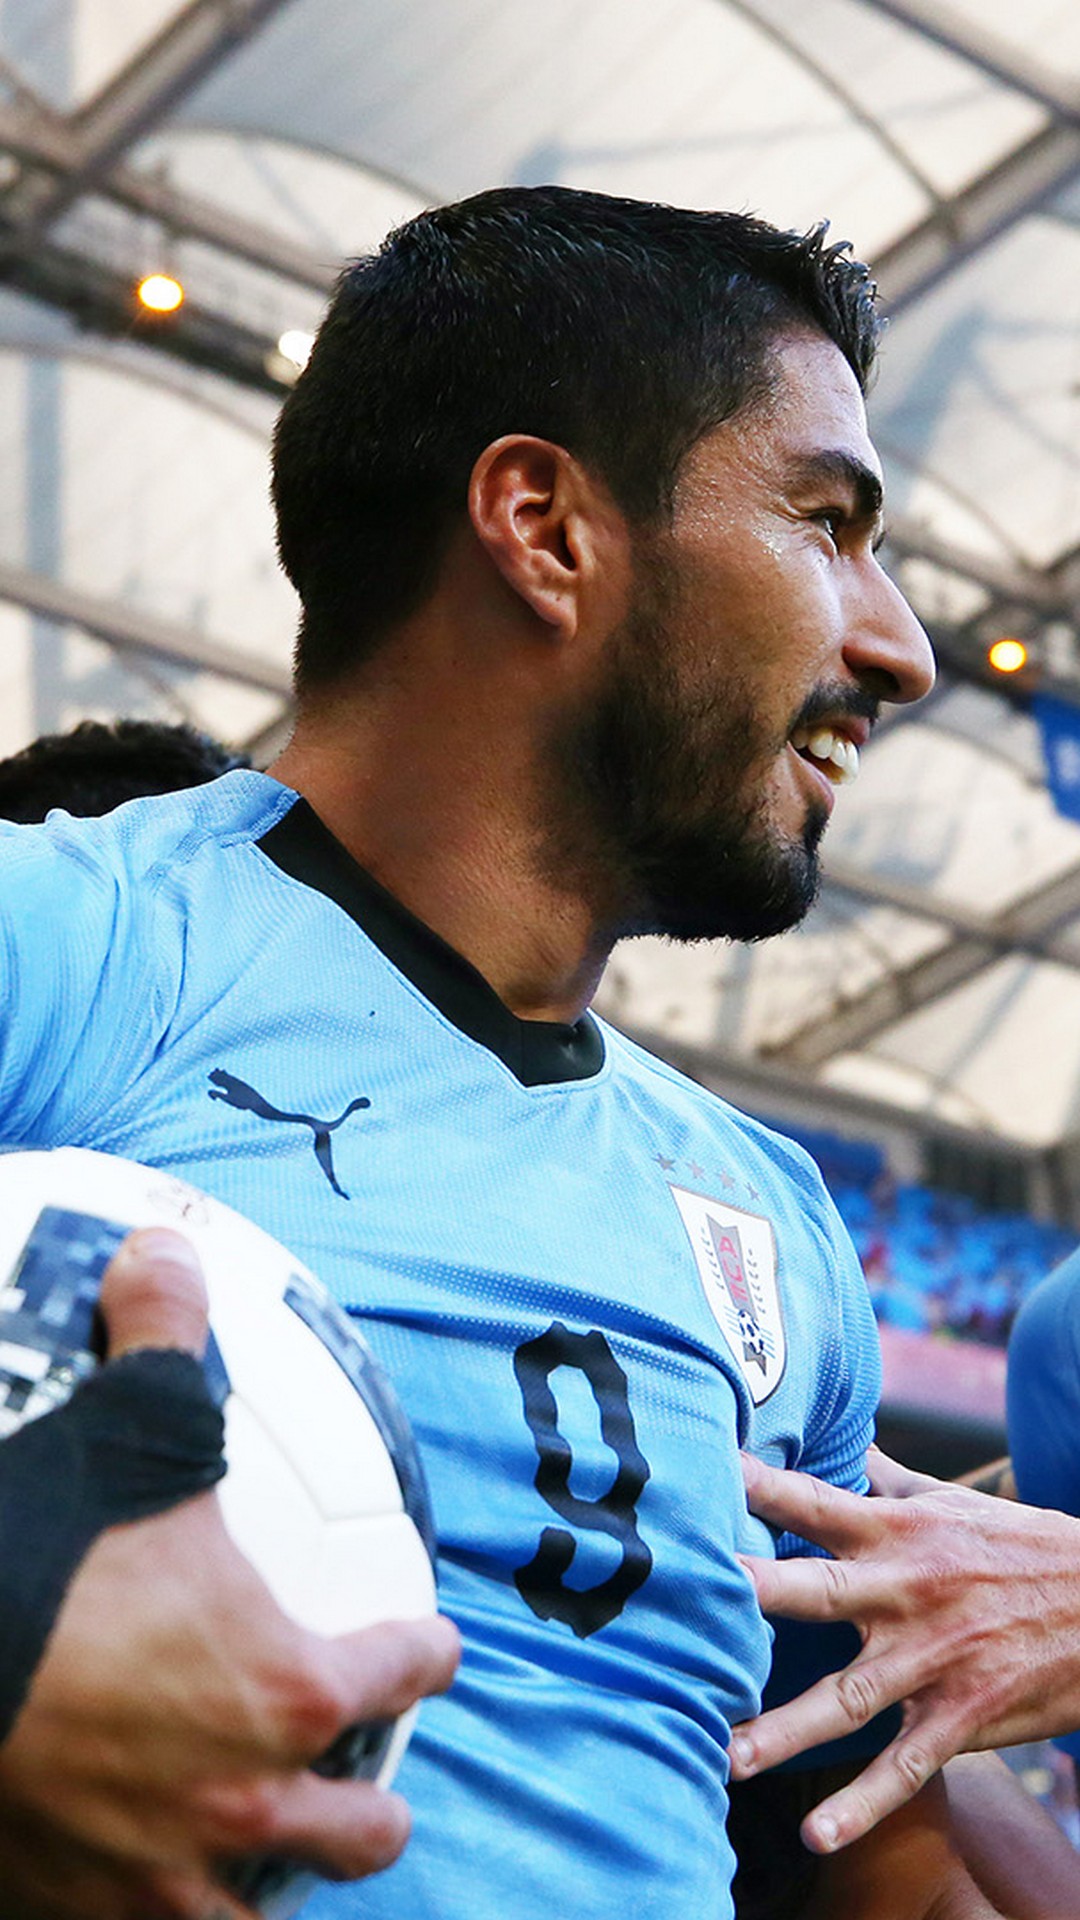 iPhone X Wallpaper Luis Suarez Uruguay with image resolution 1080x1920 pixel. You can make this wallpaper for your iPhone 5, 6, 7, 8, X backgrounds, Mobile Screensaver, or iPad Lock Screen